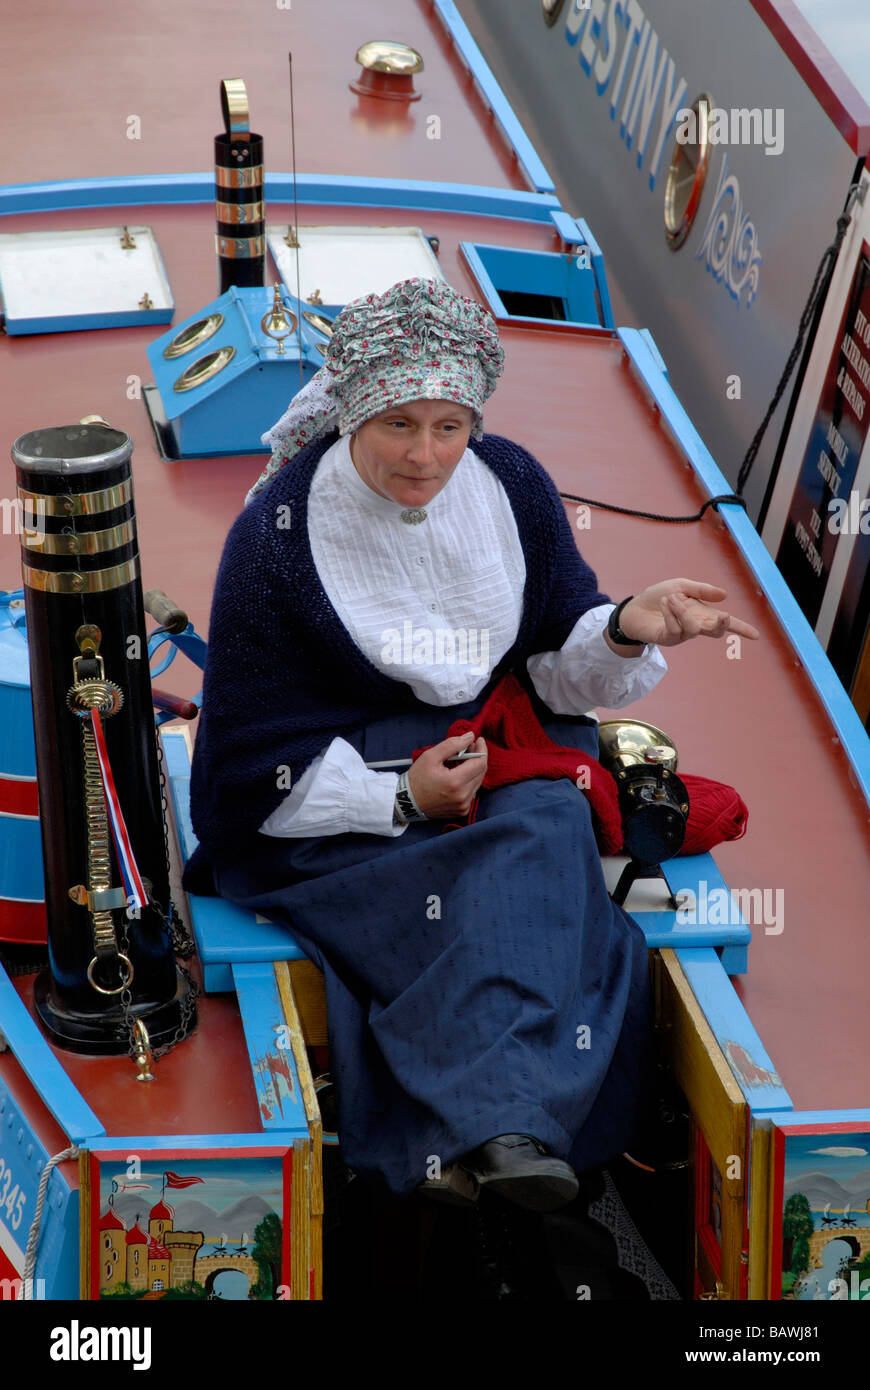 Woman in traditional Victorian narrowboat costume with her knitting sitting on hatch of working narrowboat, London, England Stock Photo